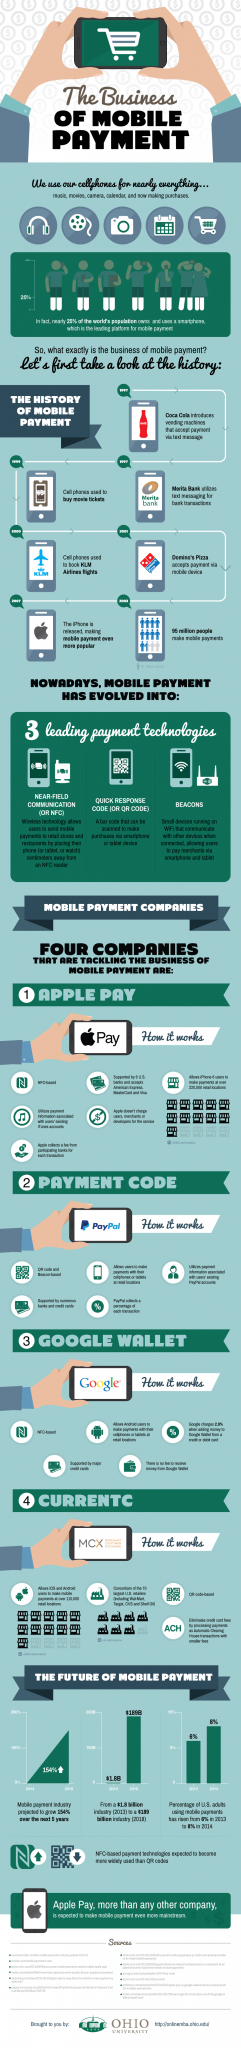 The Business of Mobile Payment